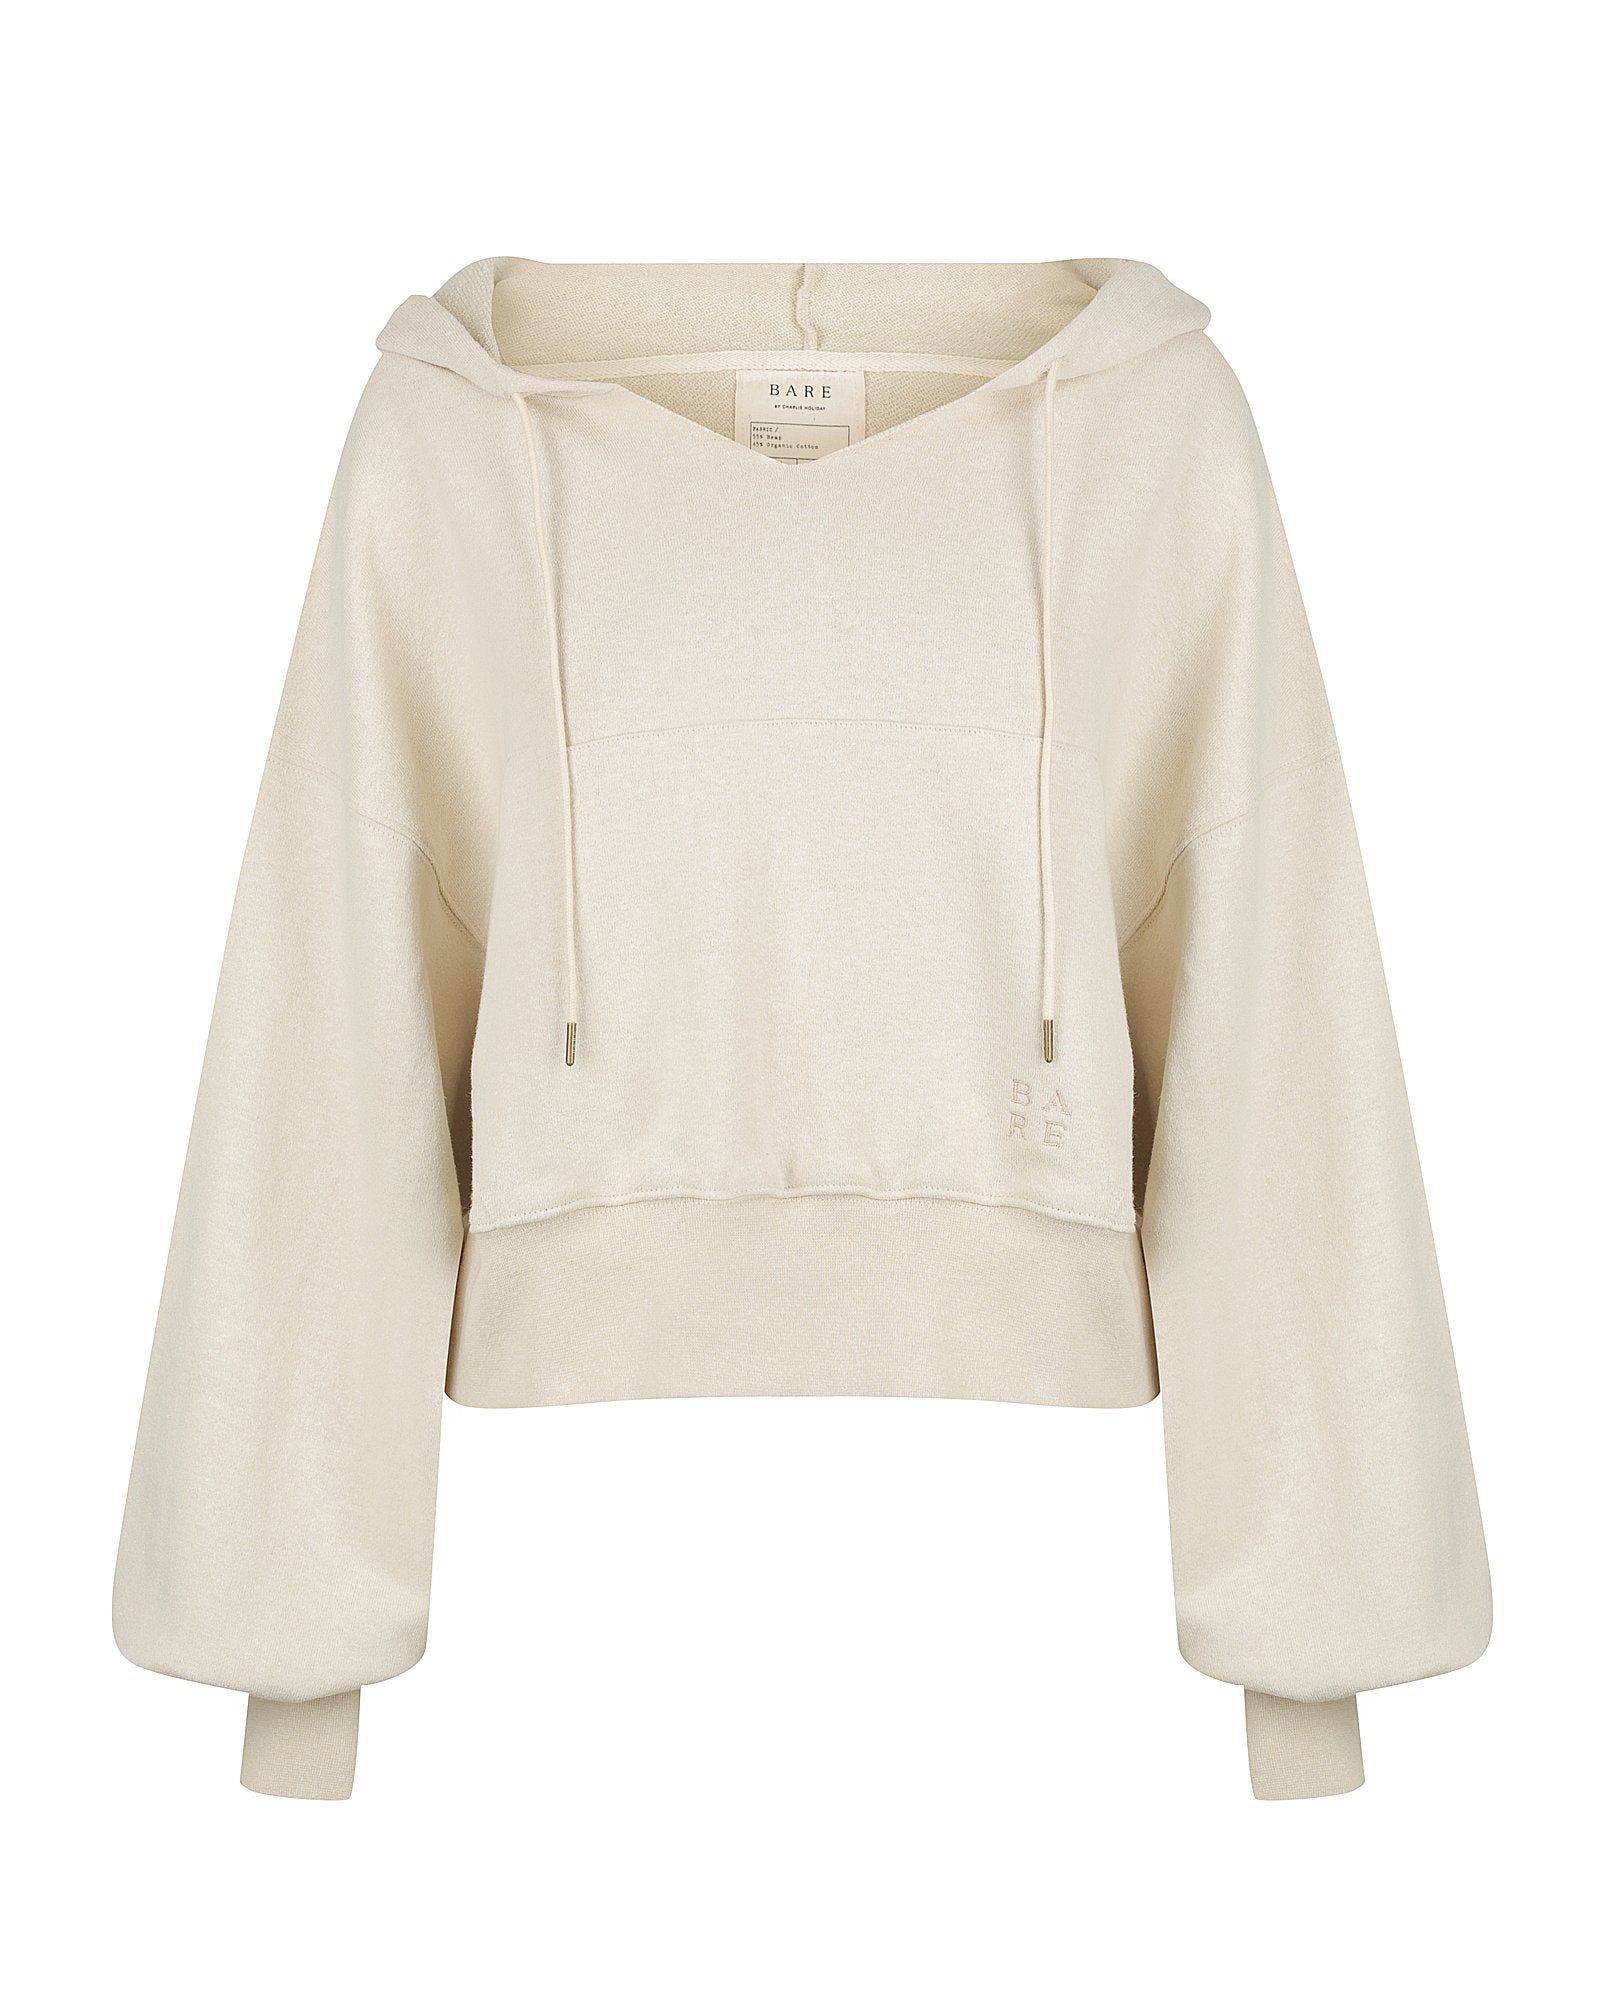 BARE ~ The Hoodie ~ was $149